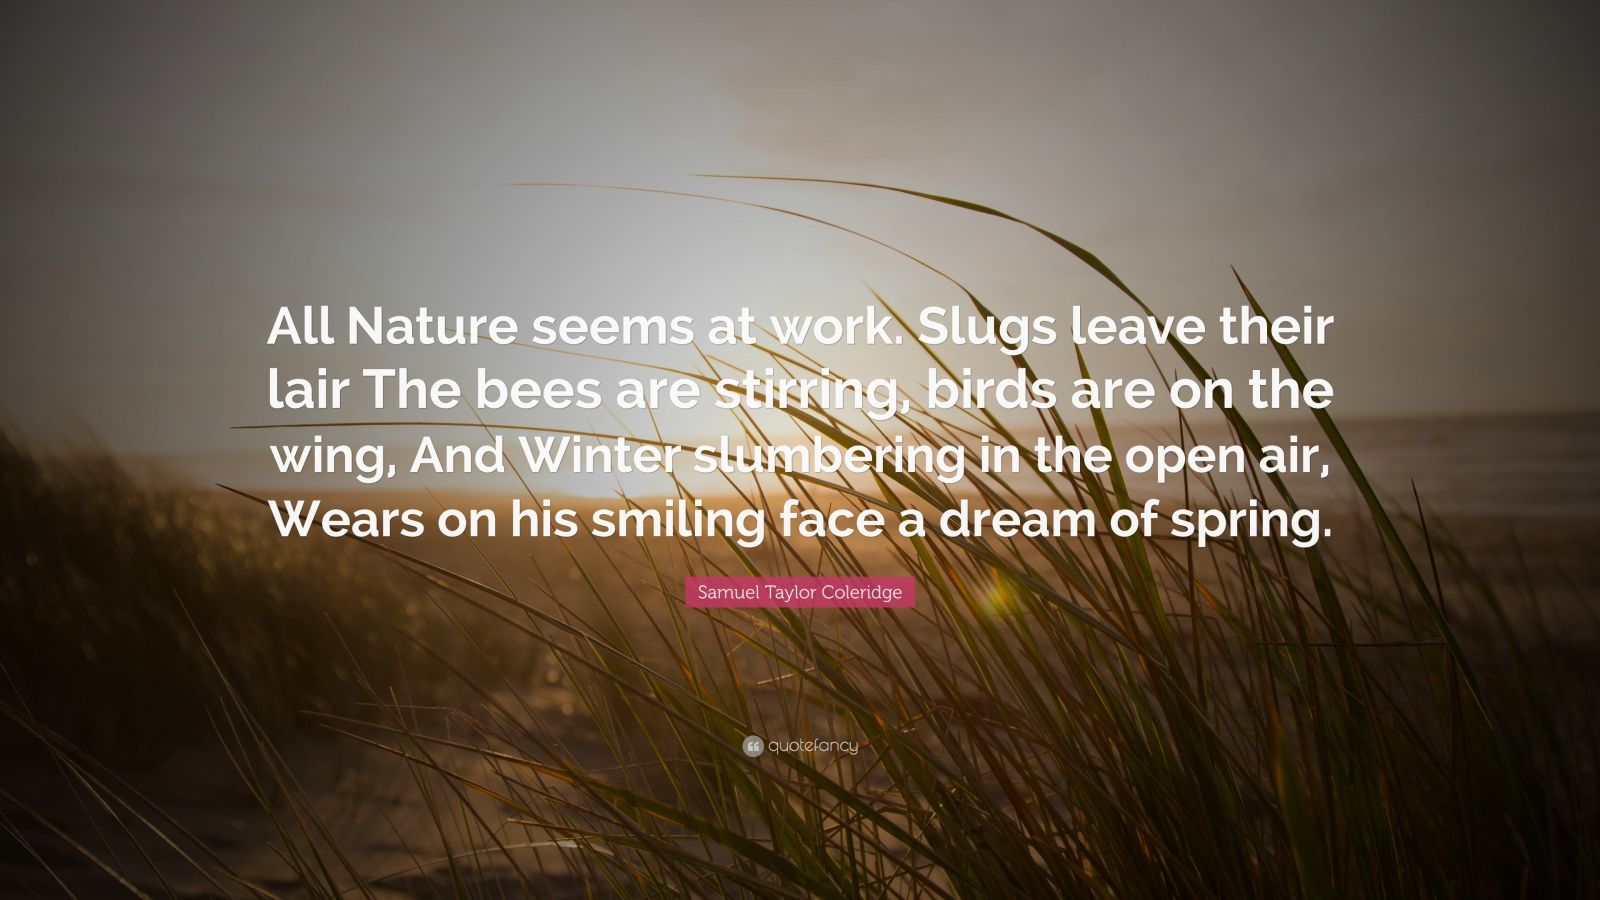 Samuel Taylor Coleridge Quote: “All Nature seems at work. Slugs leave their lair The ...1600 x 900